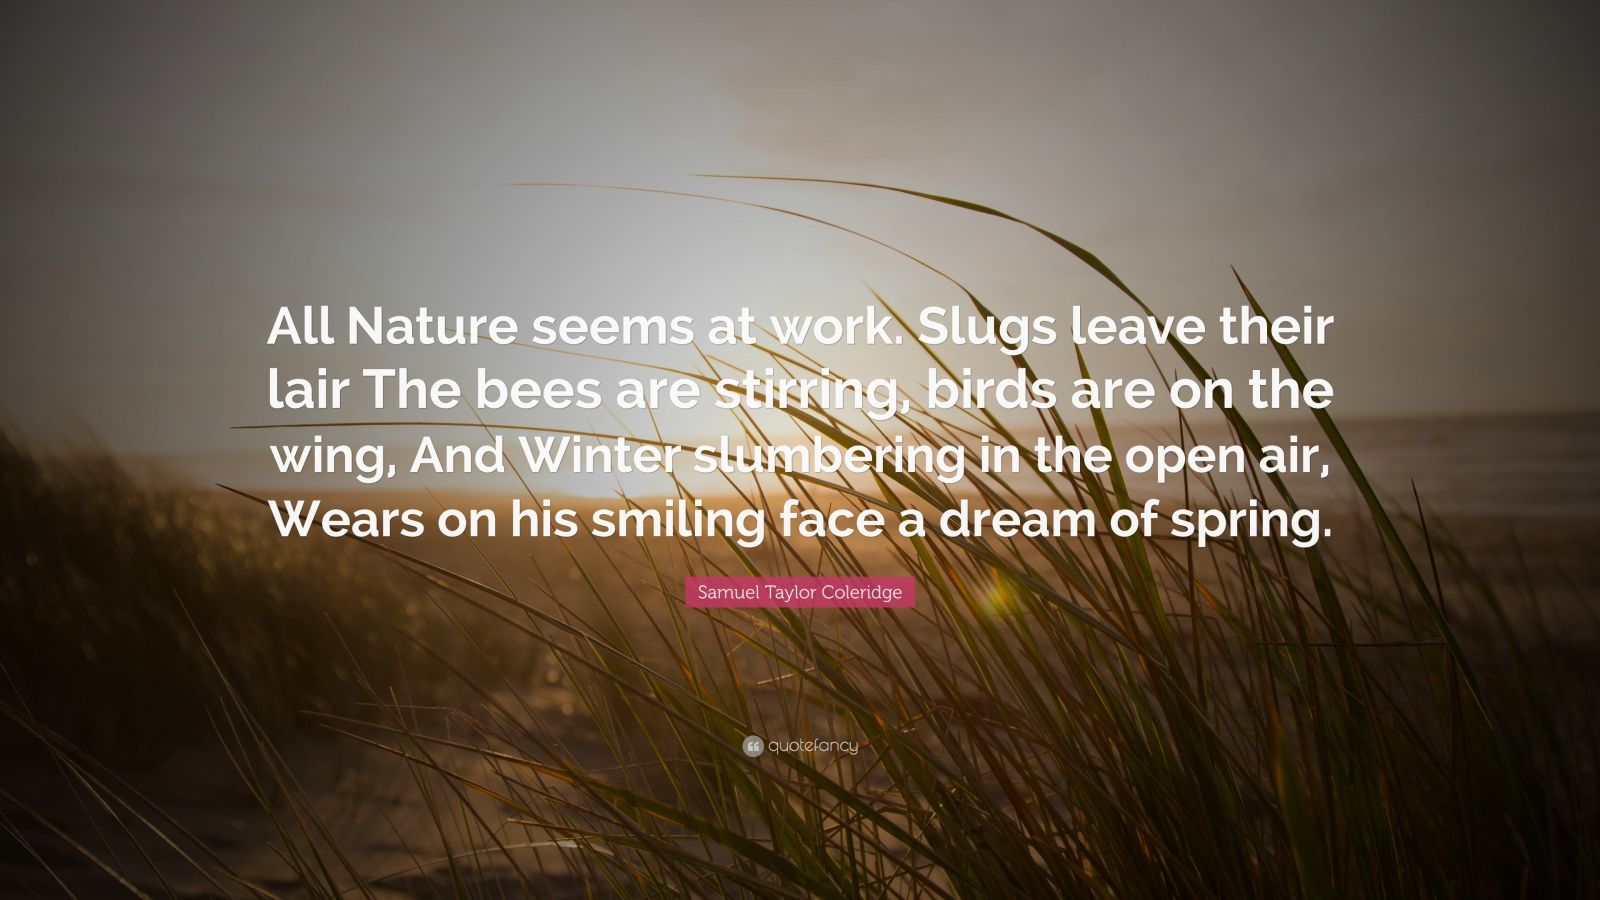 Samuel Taylor Coleridge Quote: “All Nature seems at work. Slugs leave their lair The ...1600 x 900